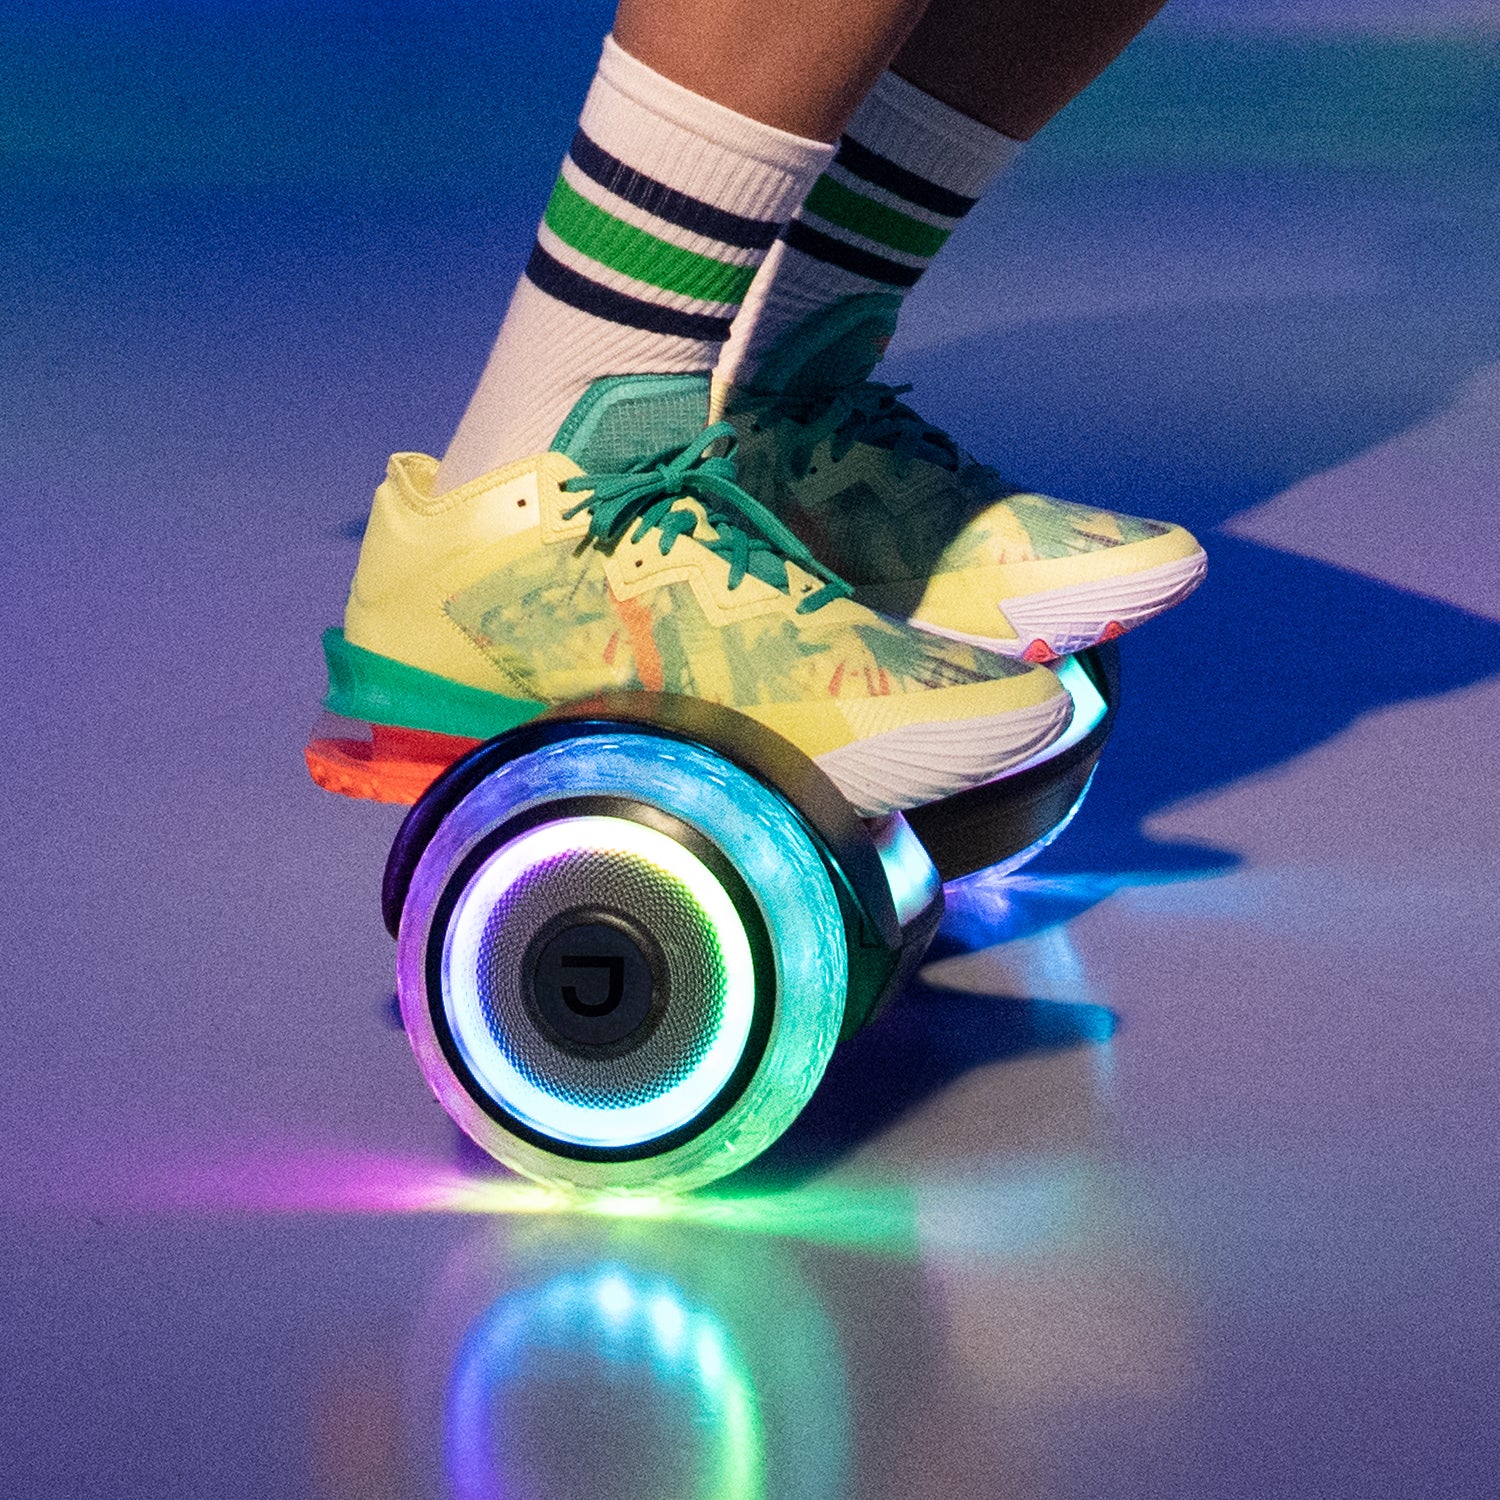 close up of a person riding the input hoverboard with the wheels lit up